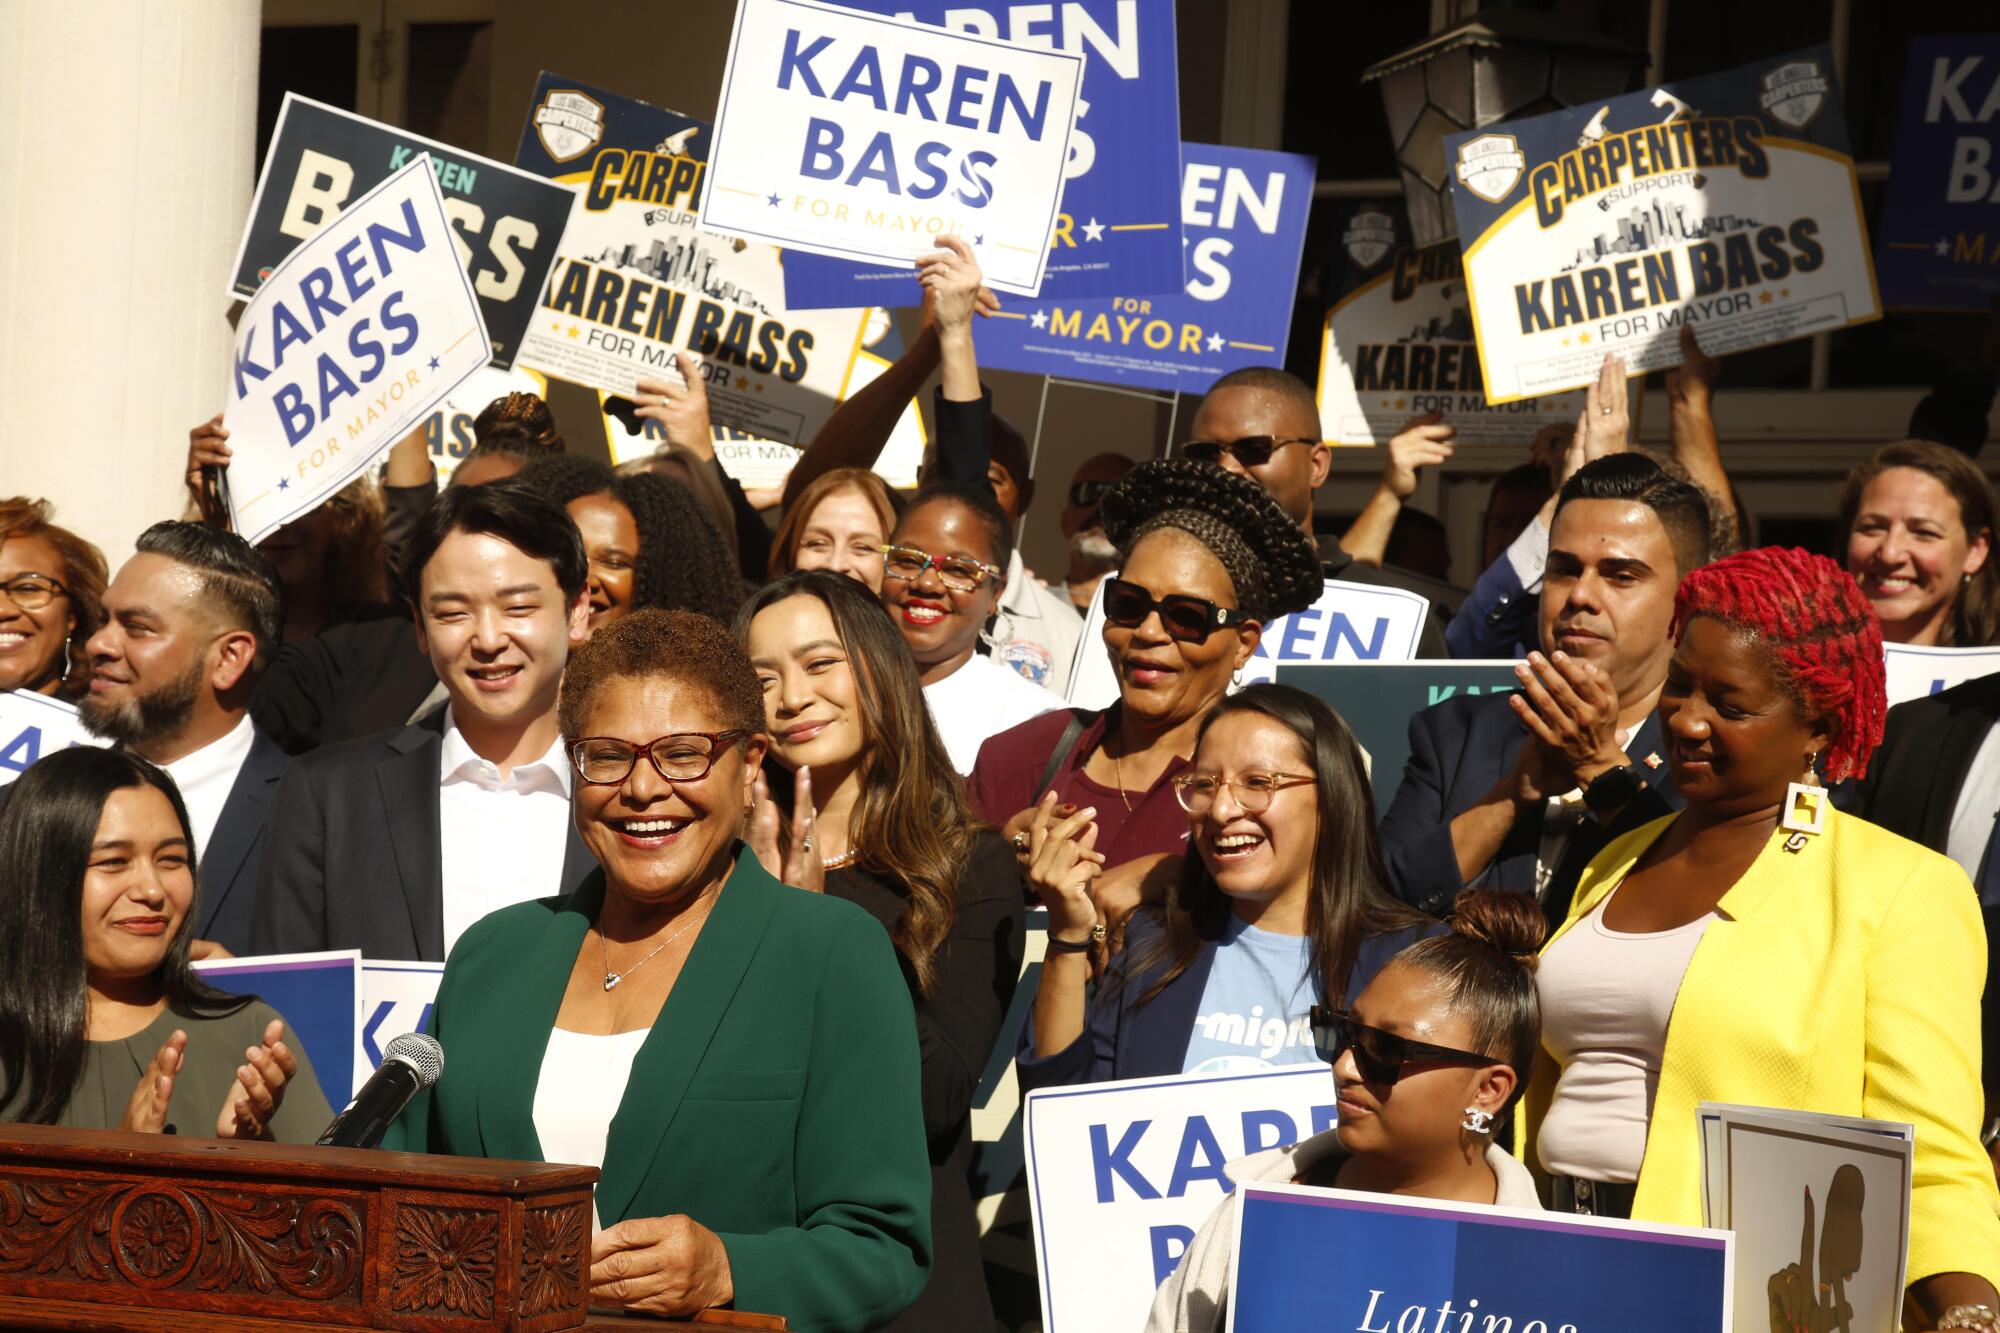 L.A. Mayor-elect Karen Bass addresses the media in front of happy supporters at Wilshire Ebell Theatre.